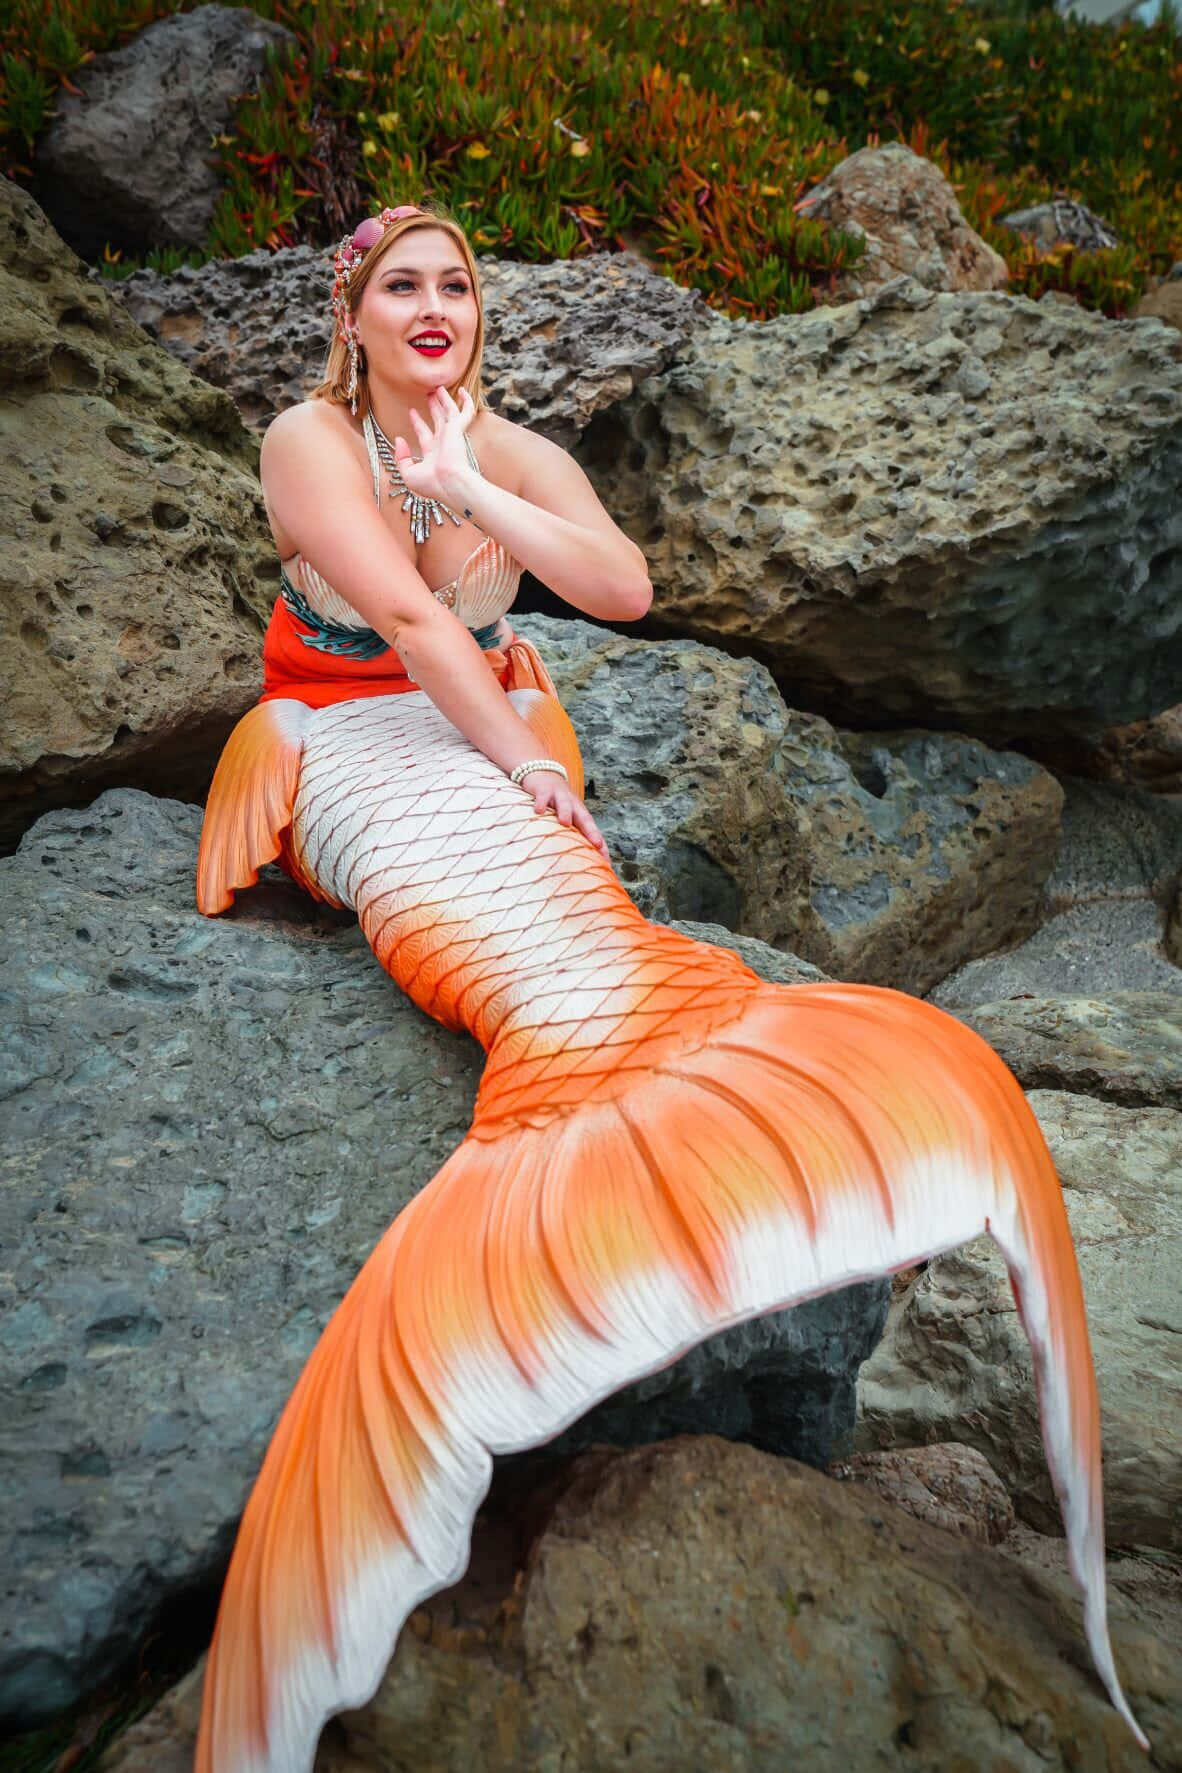 Behold the majestic beauty of a real mermaid!